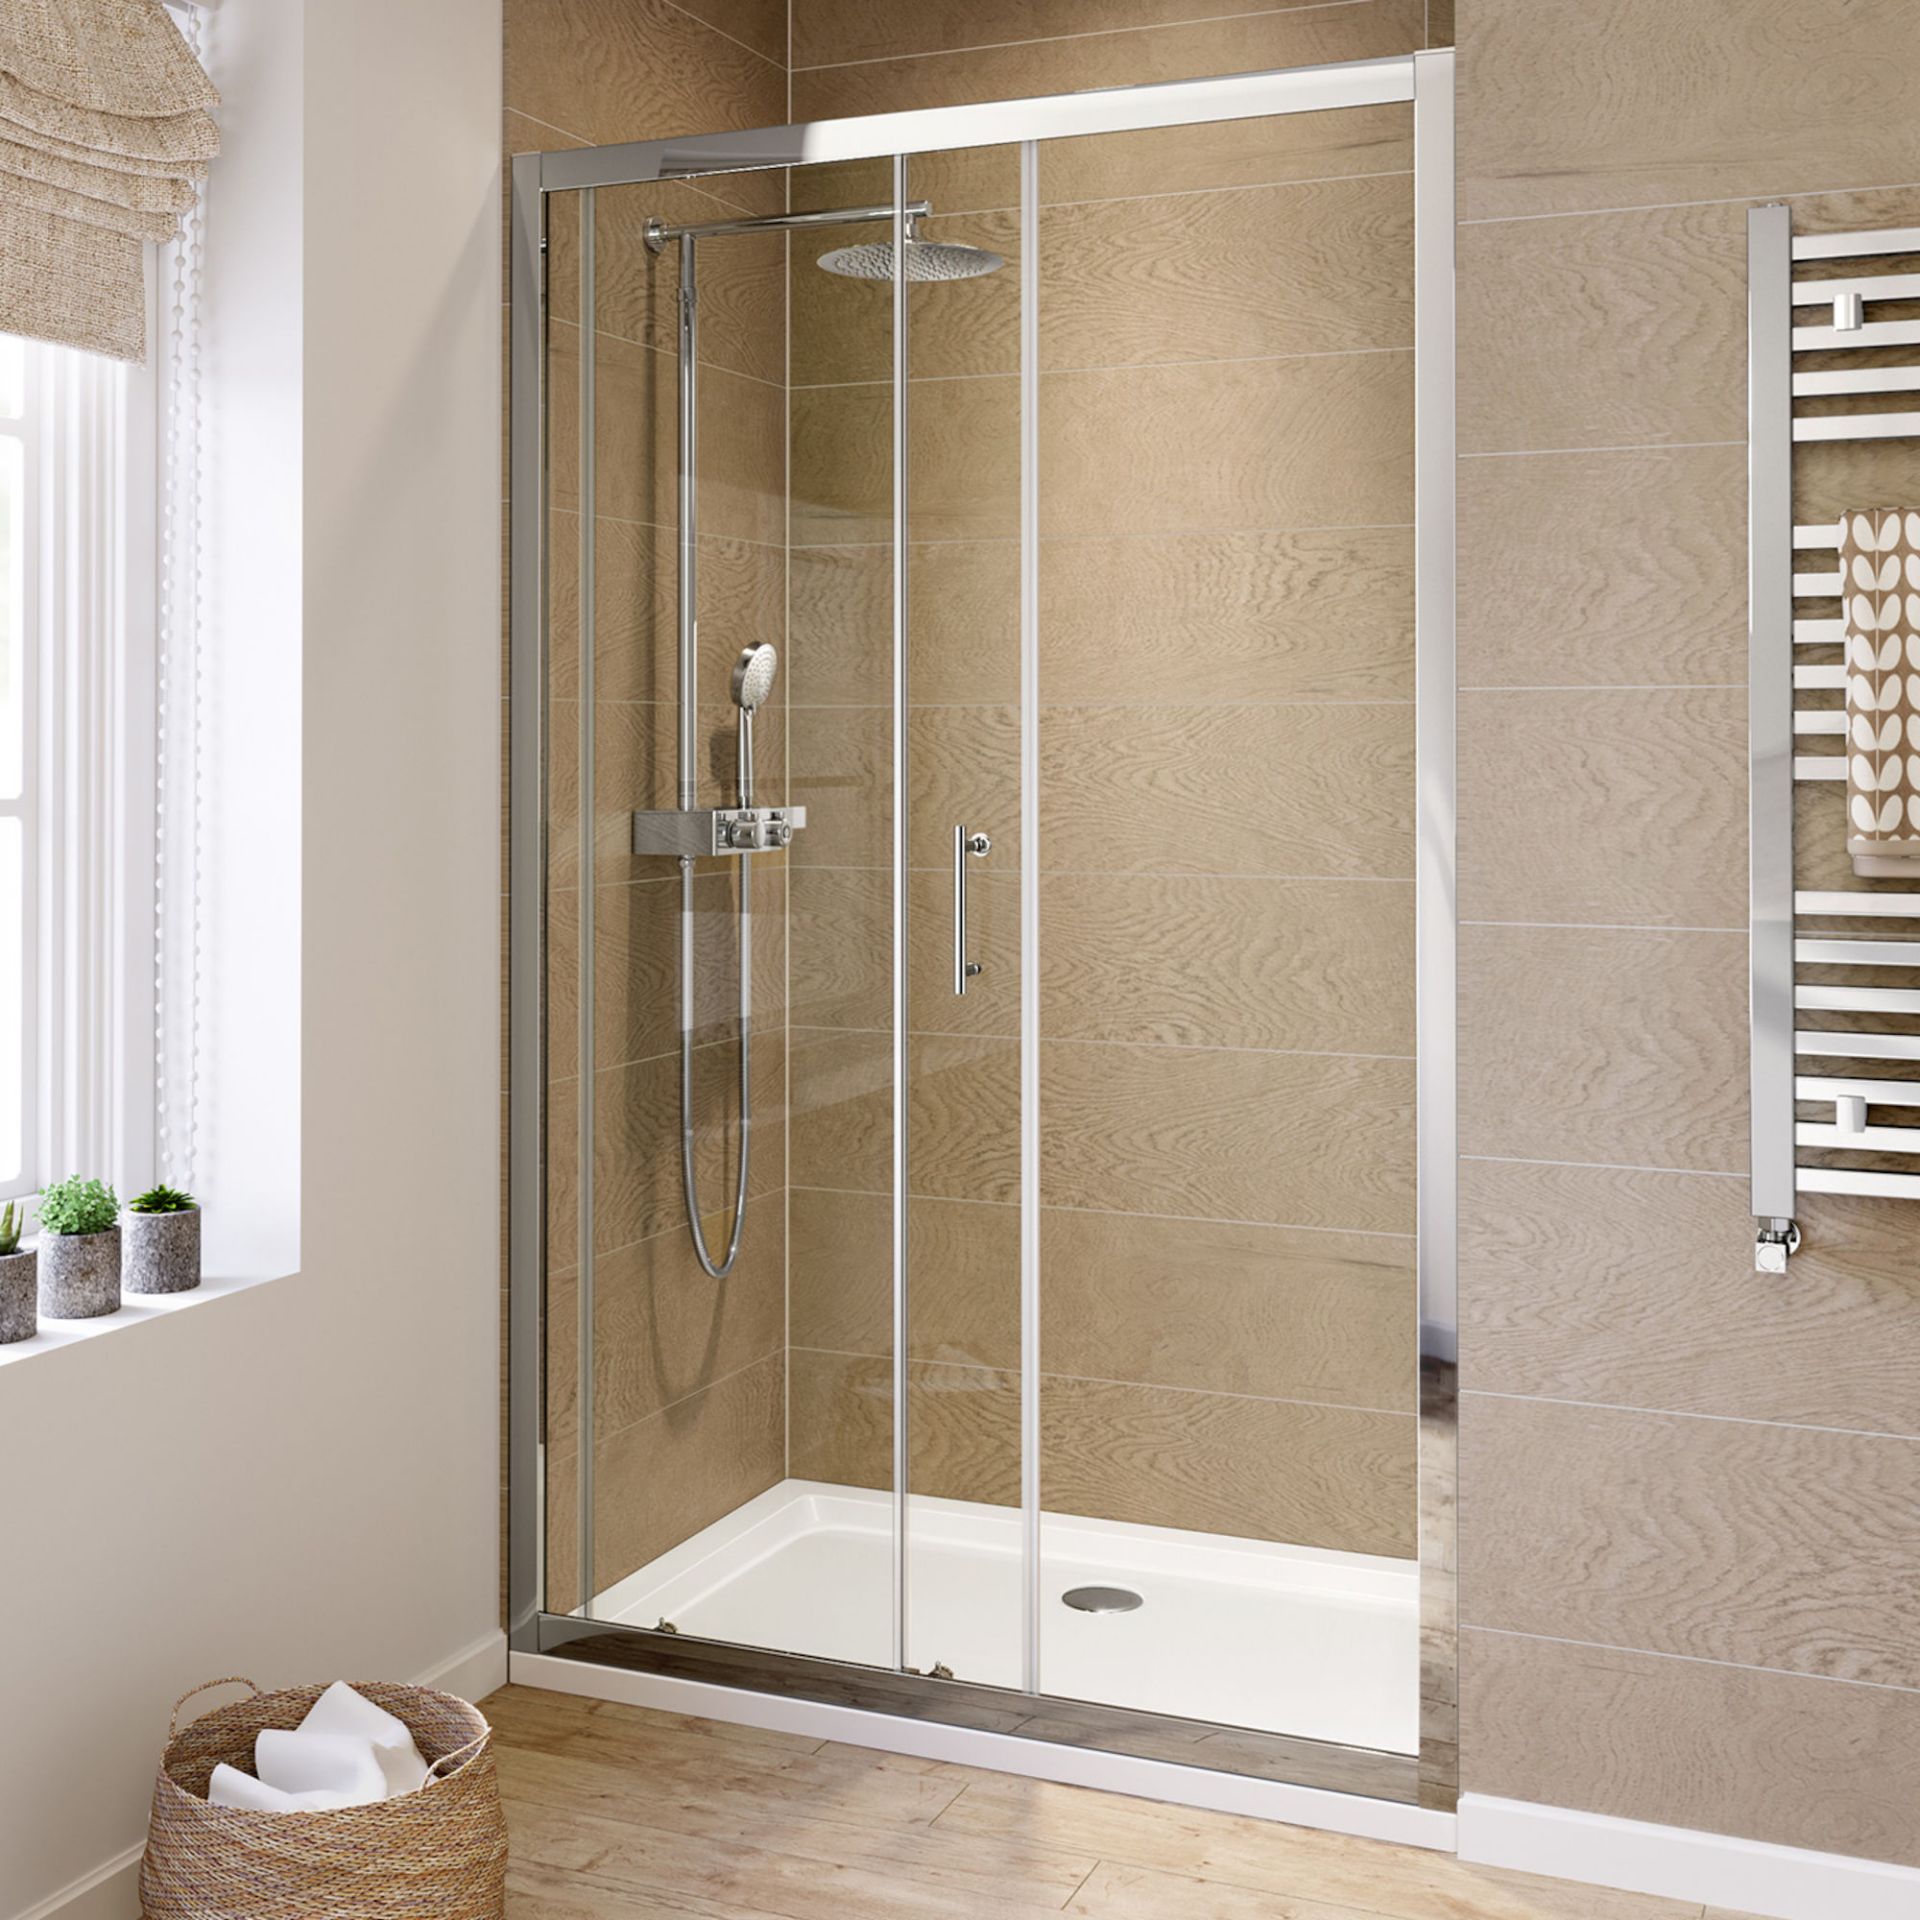 (XS309) 1200mm - 6mm - Elements Sliding Shower Door. RRP £299.99. 6mm Safety Glass Fully